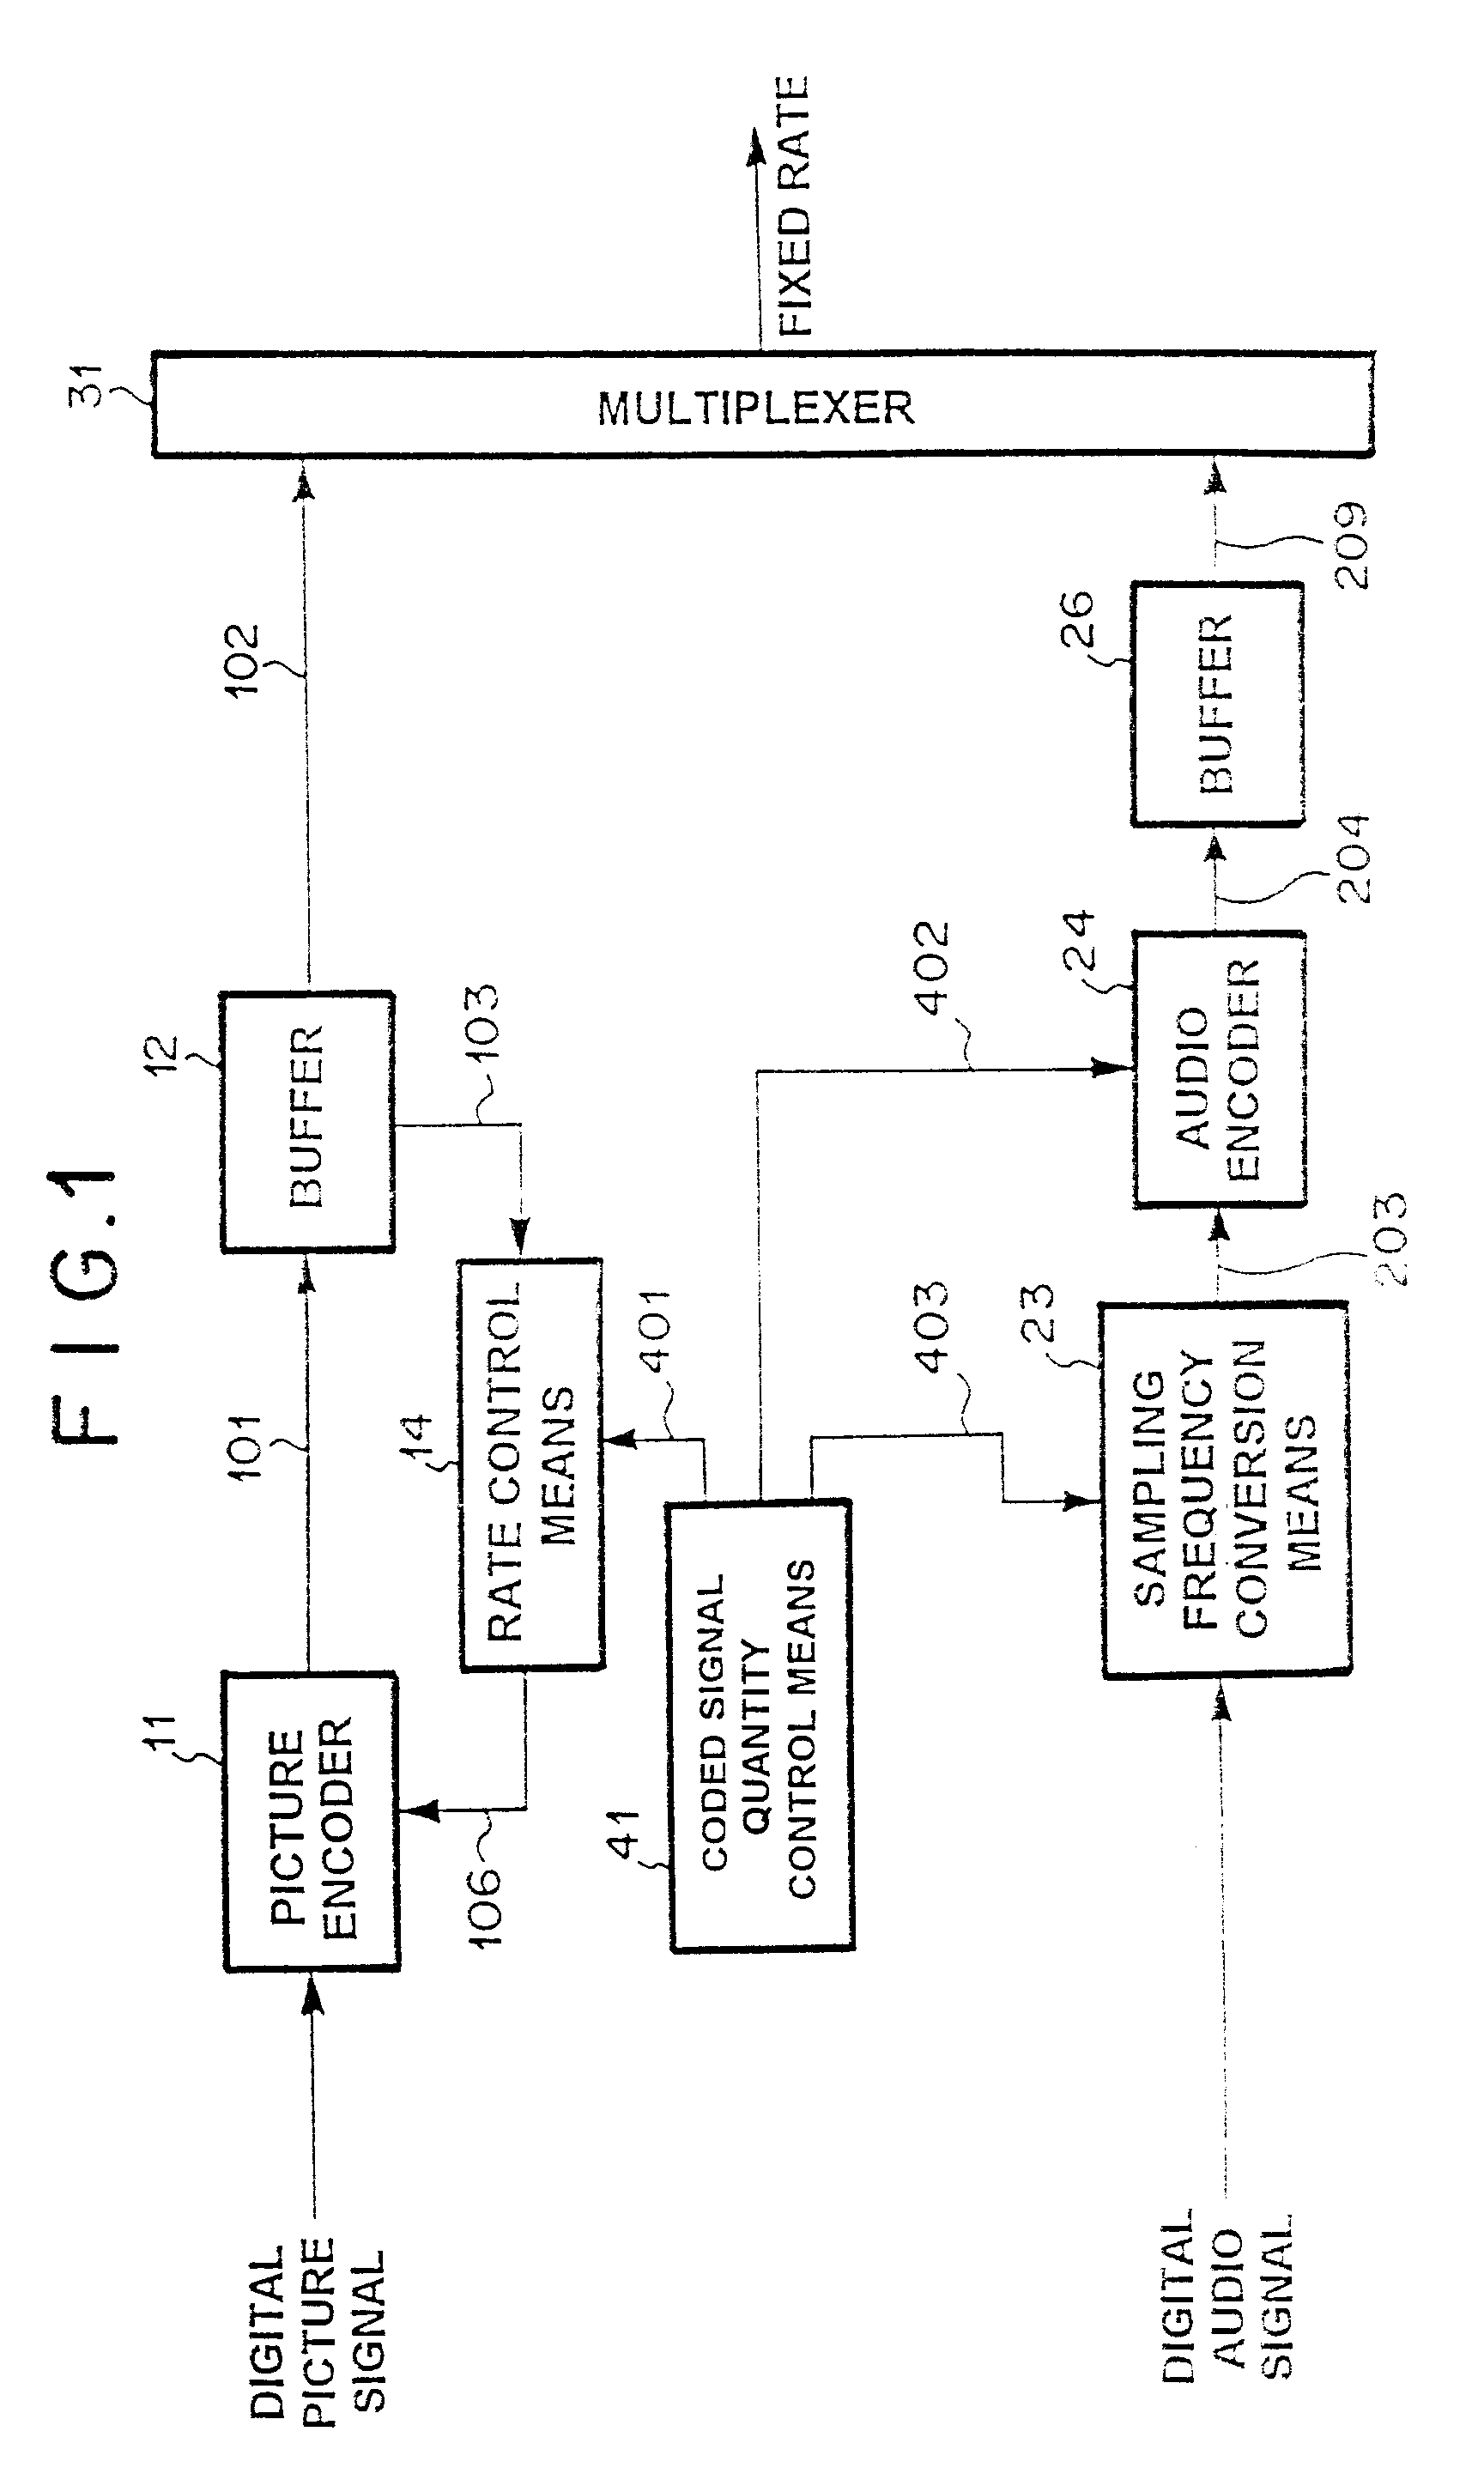 Coding apparatus for audio and picture signals